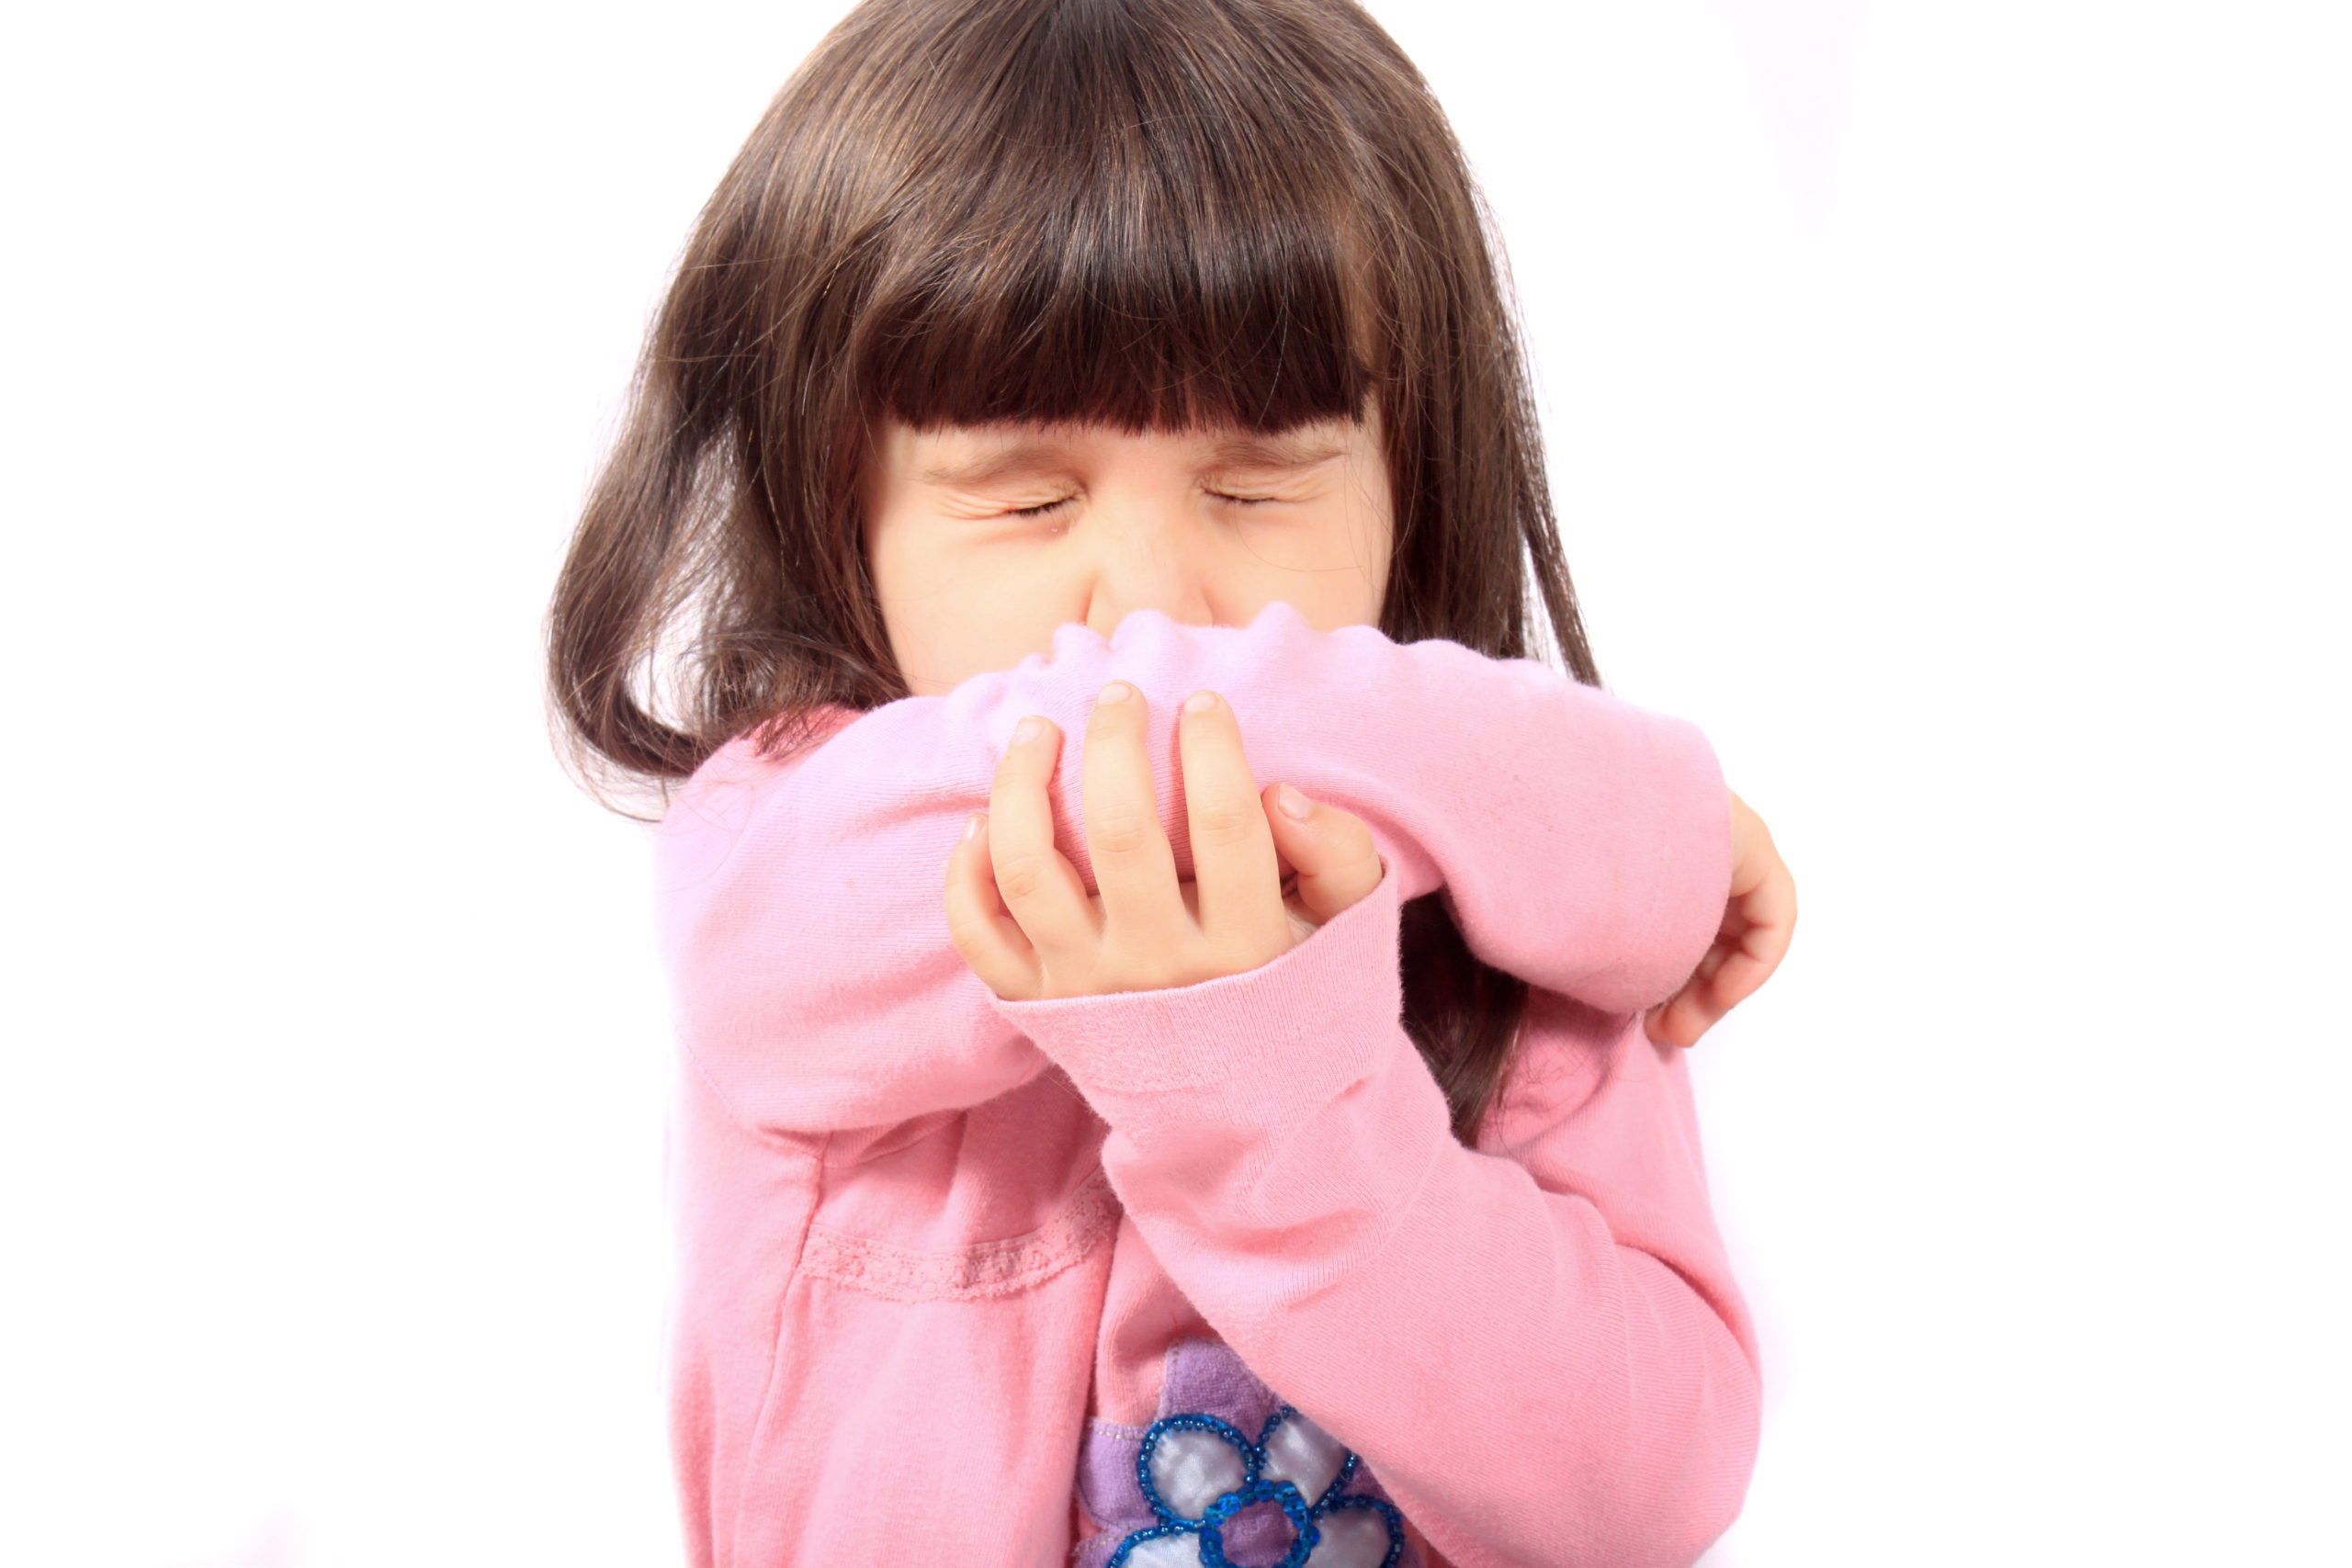 Image of a young girl sneezing into her inner arm